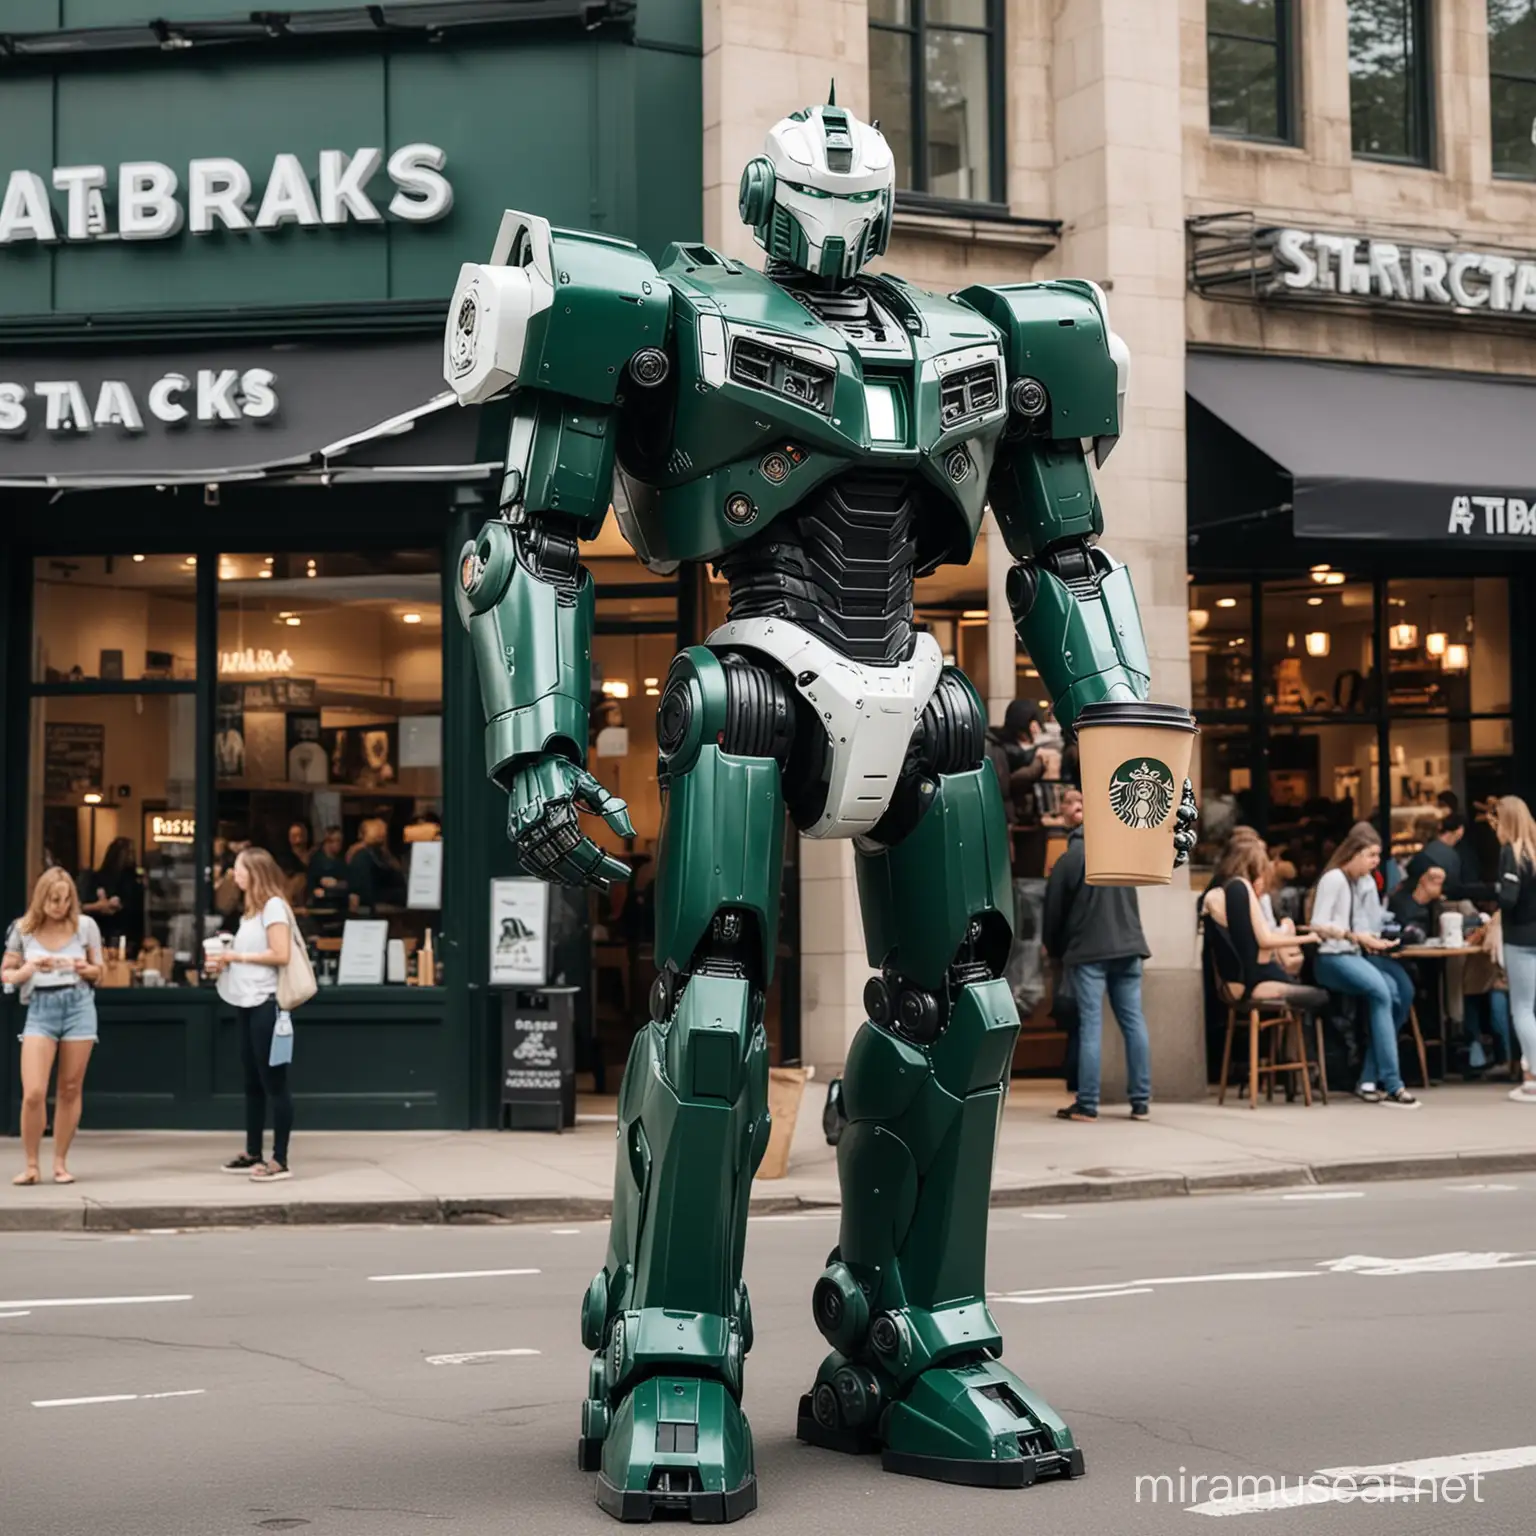 Starbacks Giant Robot Serving Coffee to Passersby